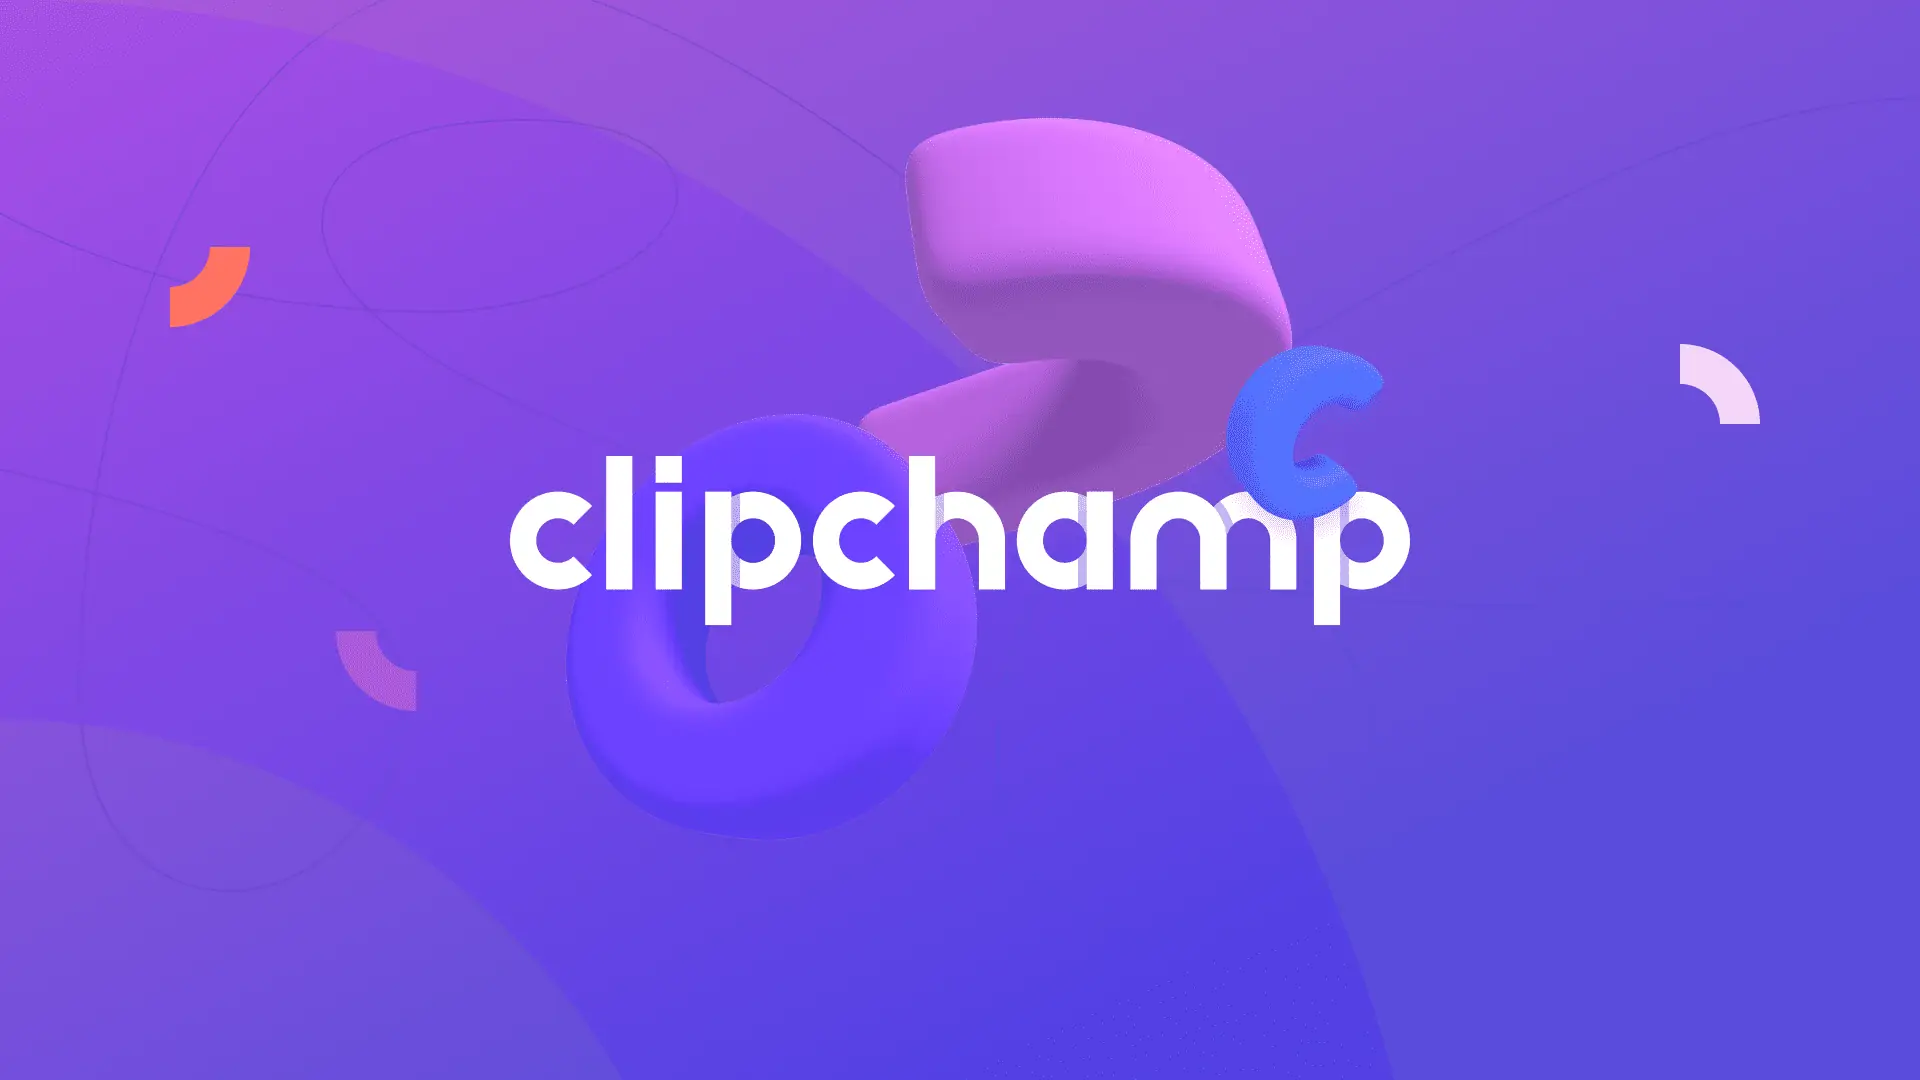 Microsoft 365 users can now access Clipchamp’s Premium filters, effects